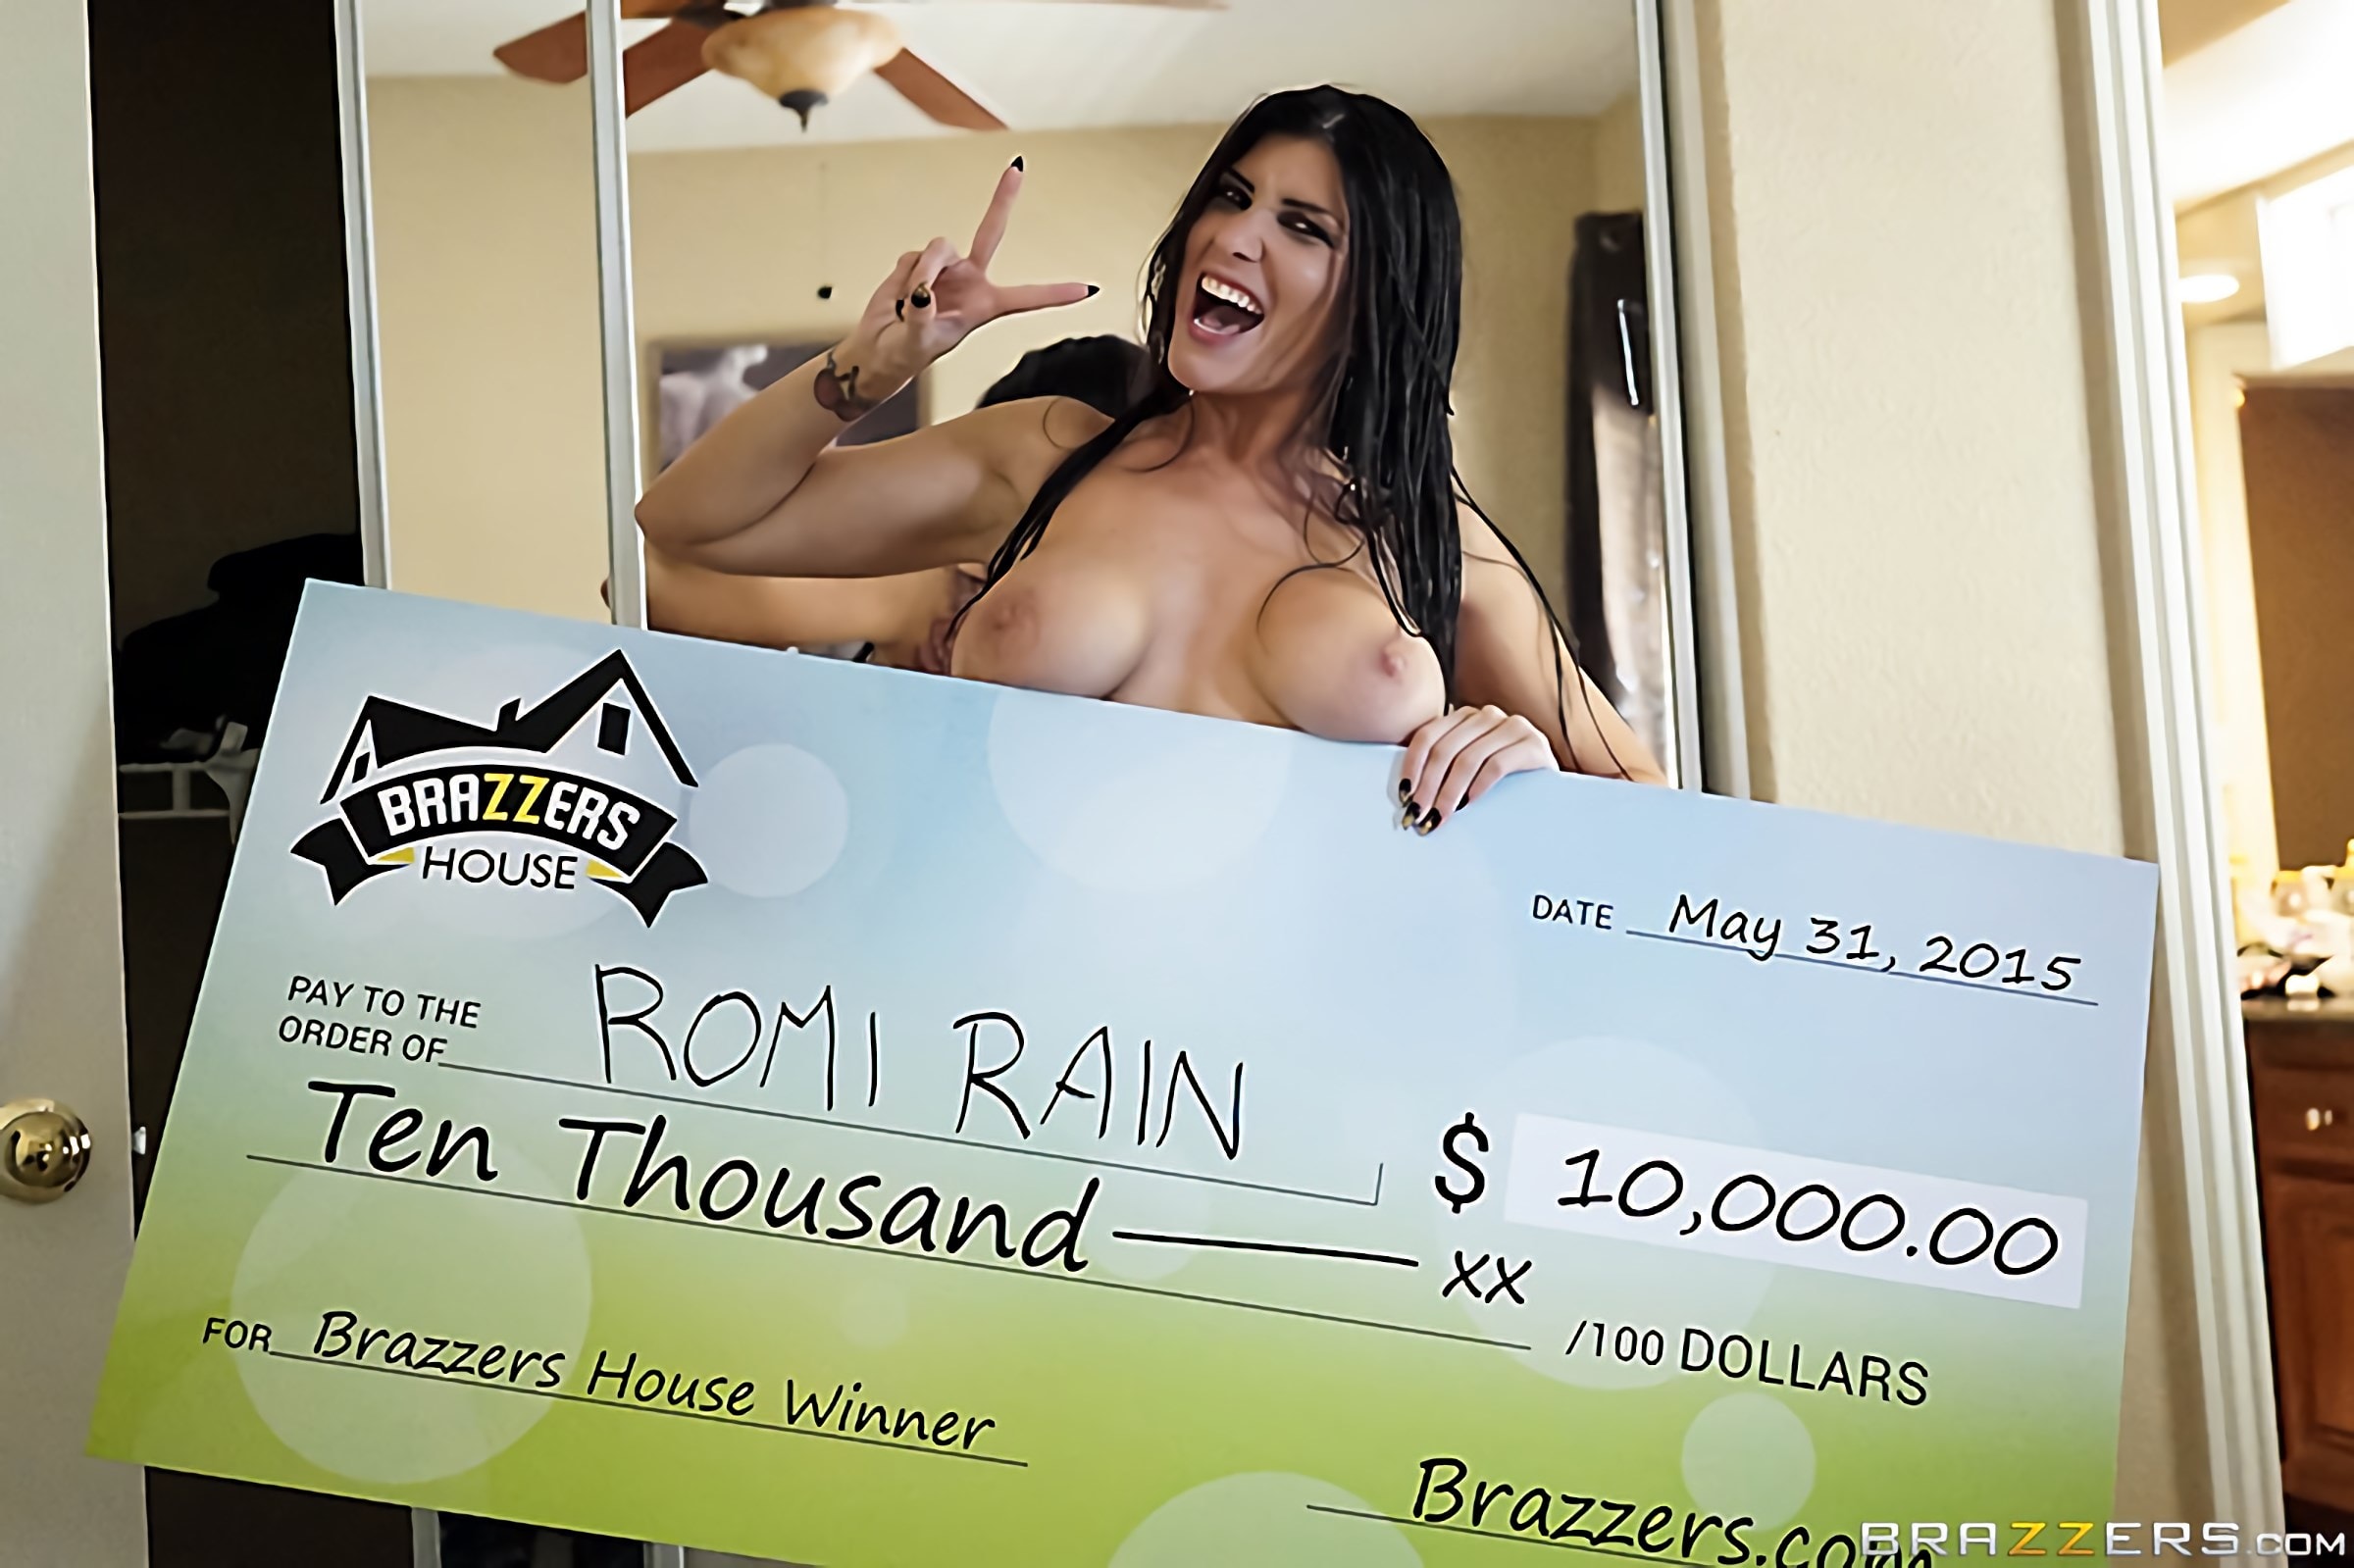 ▷ Ava Addams in Brazzers House Orgy Finale (Photo 15) Brazzers image